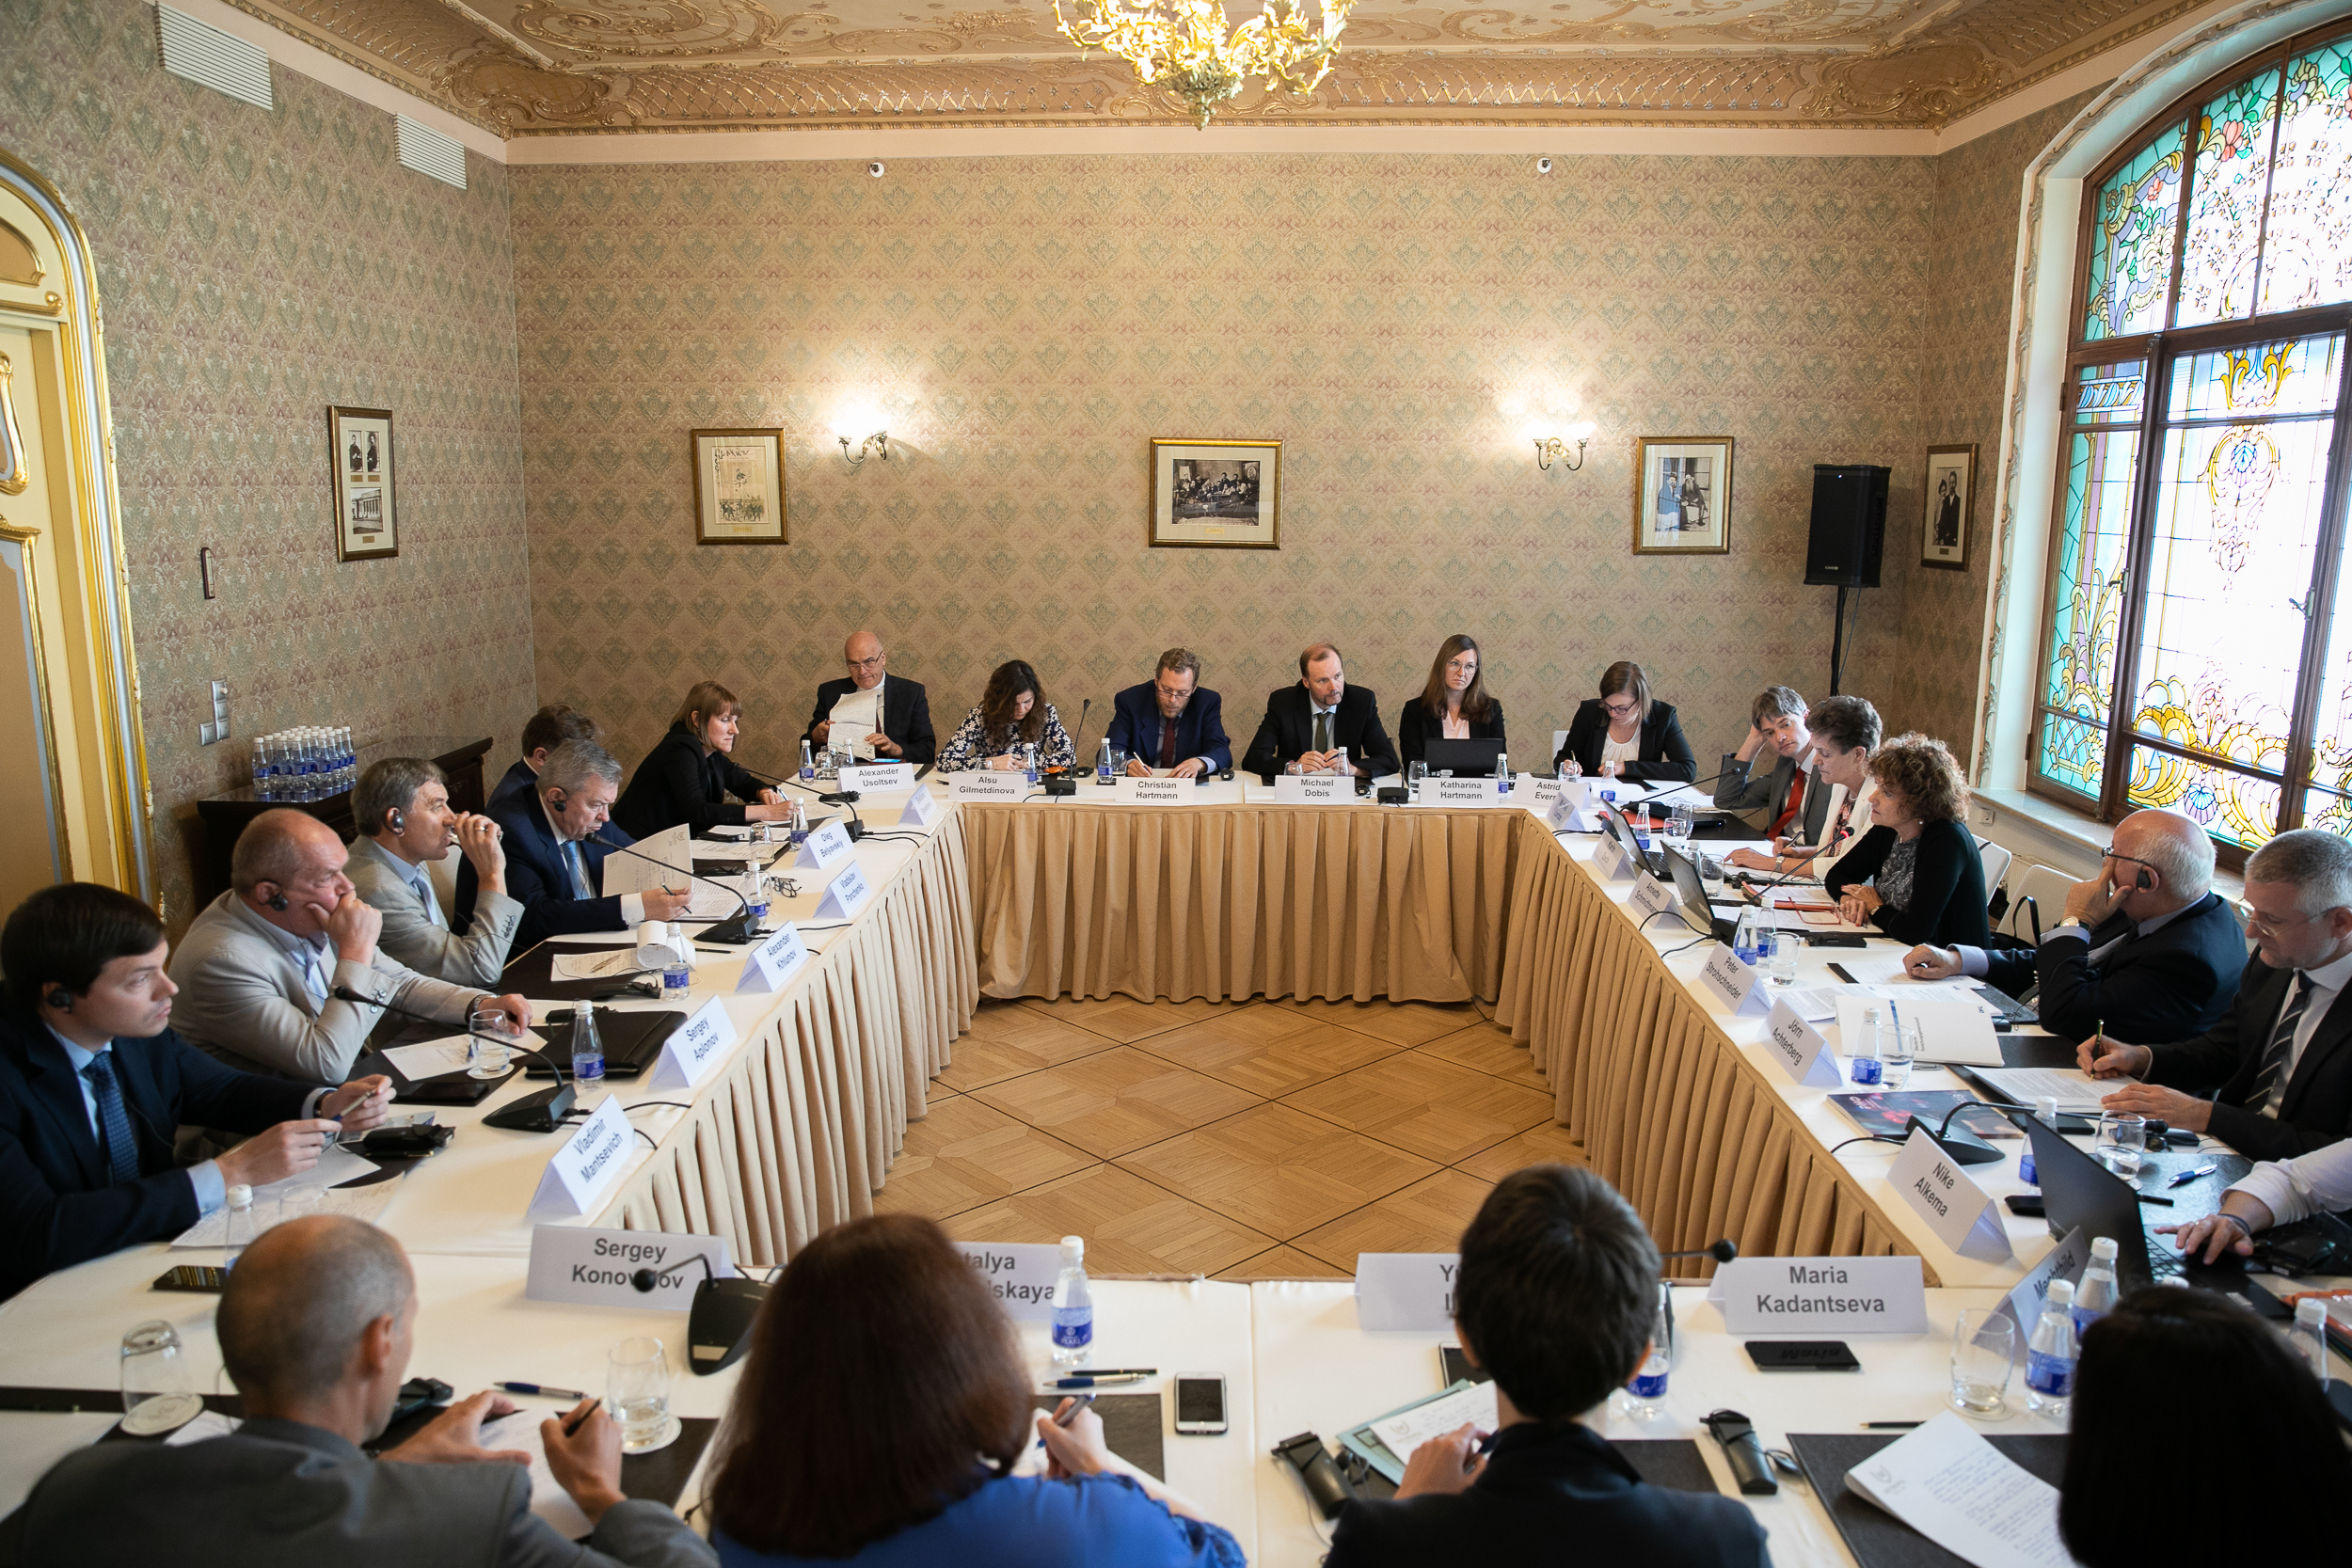 DFG delegation at the roundtable discussion with Russian partners (RFBR, RSF, MSU, SPBU, GRIAT)